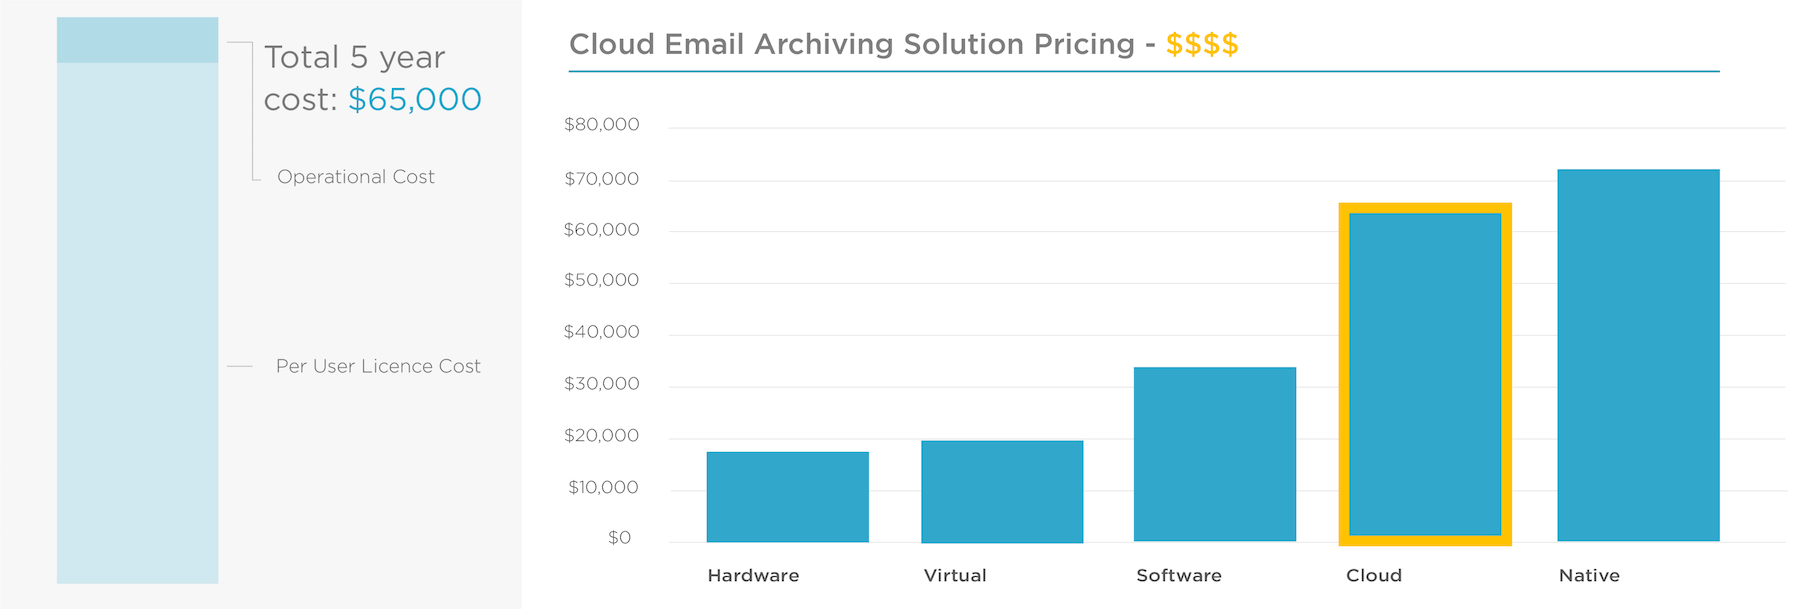 Cloud Email Archiving Solution Pricing